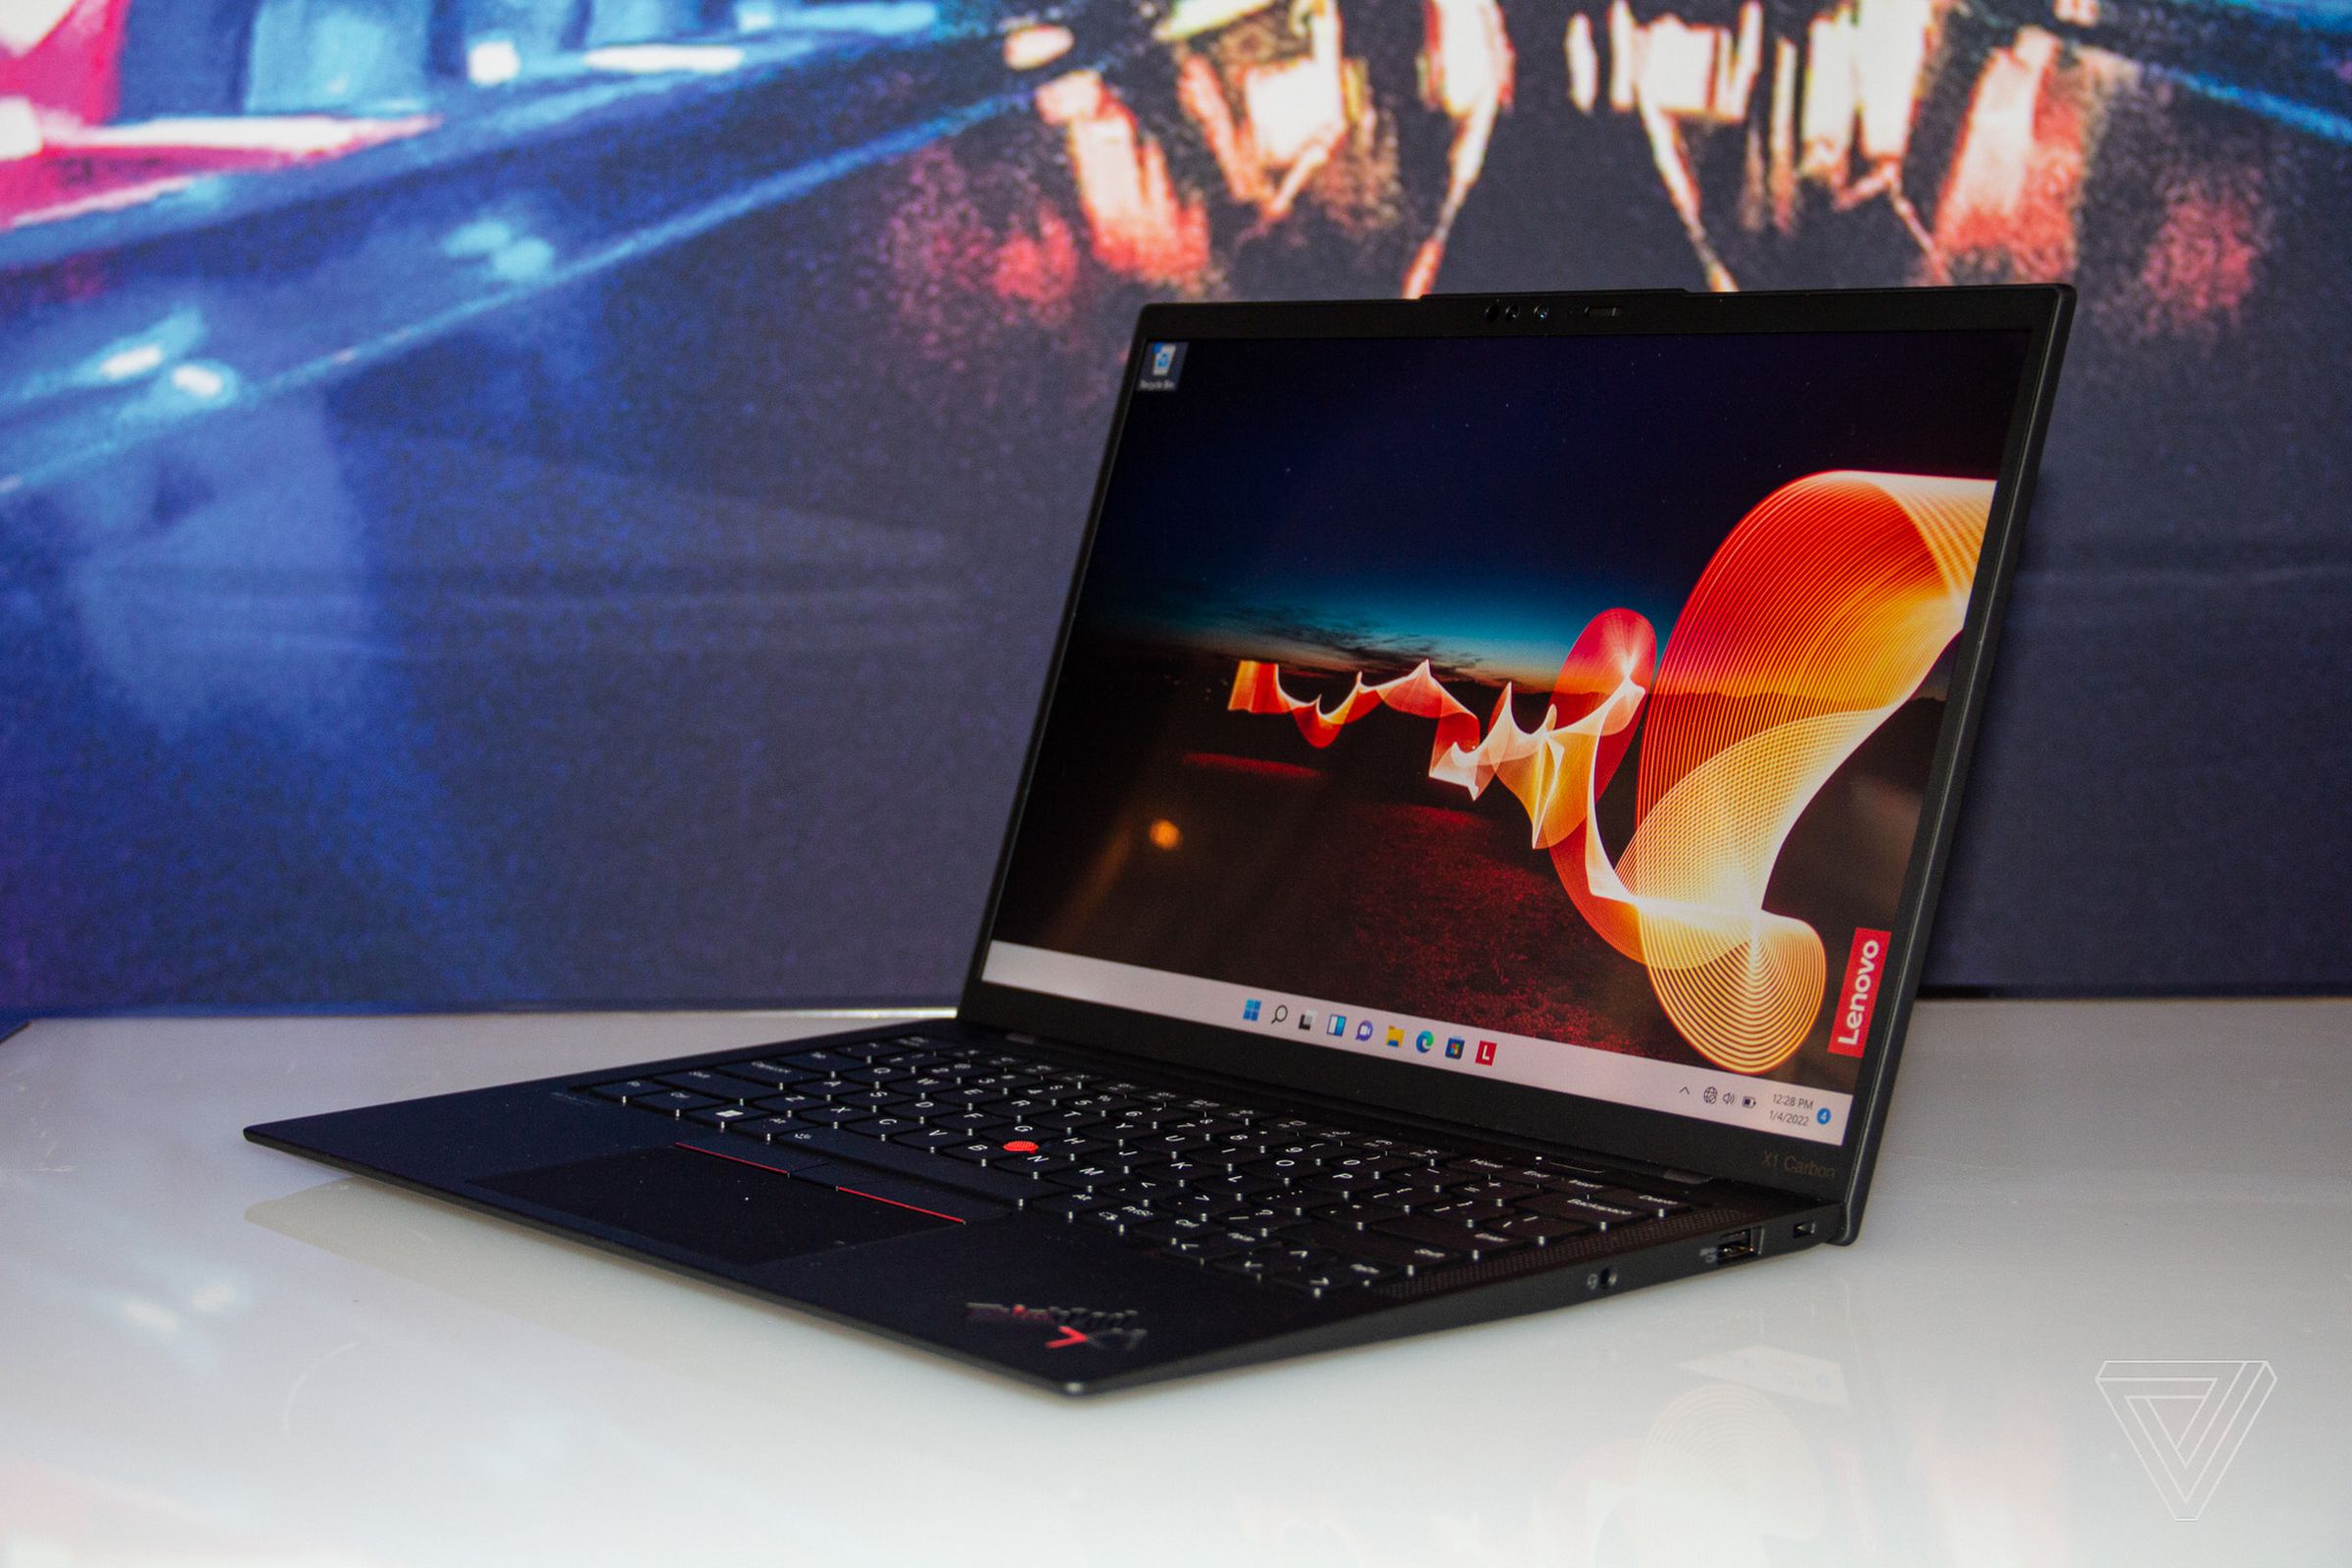 The ThinkPad X1 Carbon open on a white table angled to the left. The screen displays a night desert setting with an orange ribbon running through it and the Lenovo logo on the right side.